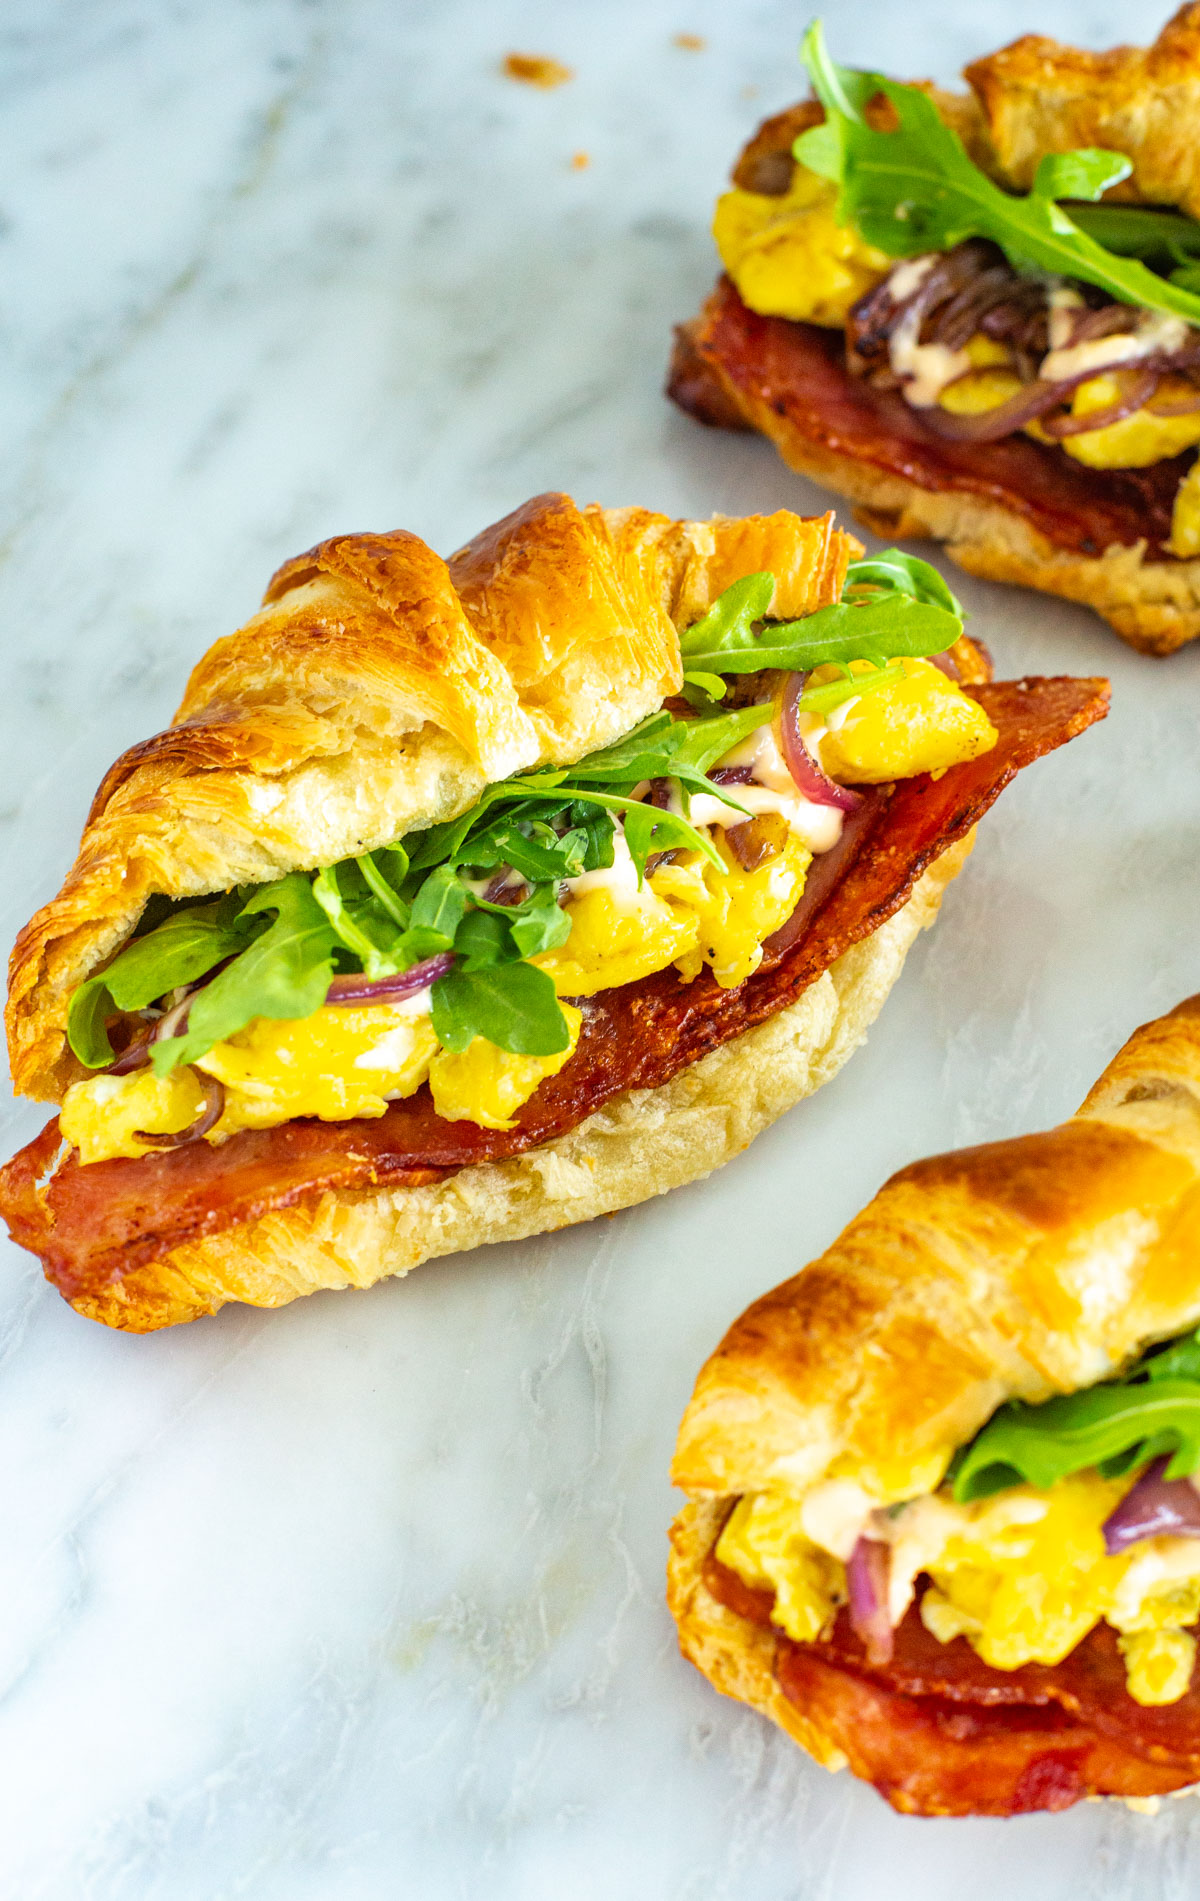 A close-up of a croissant breakfast sandwich.